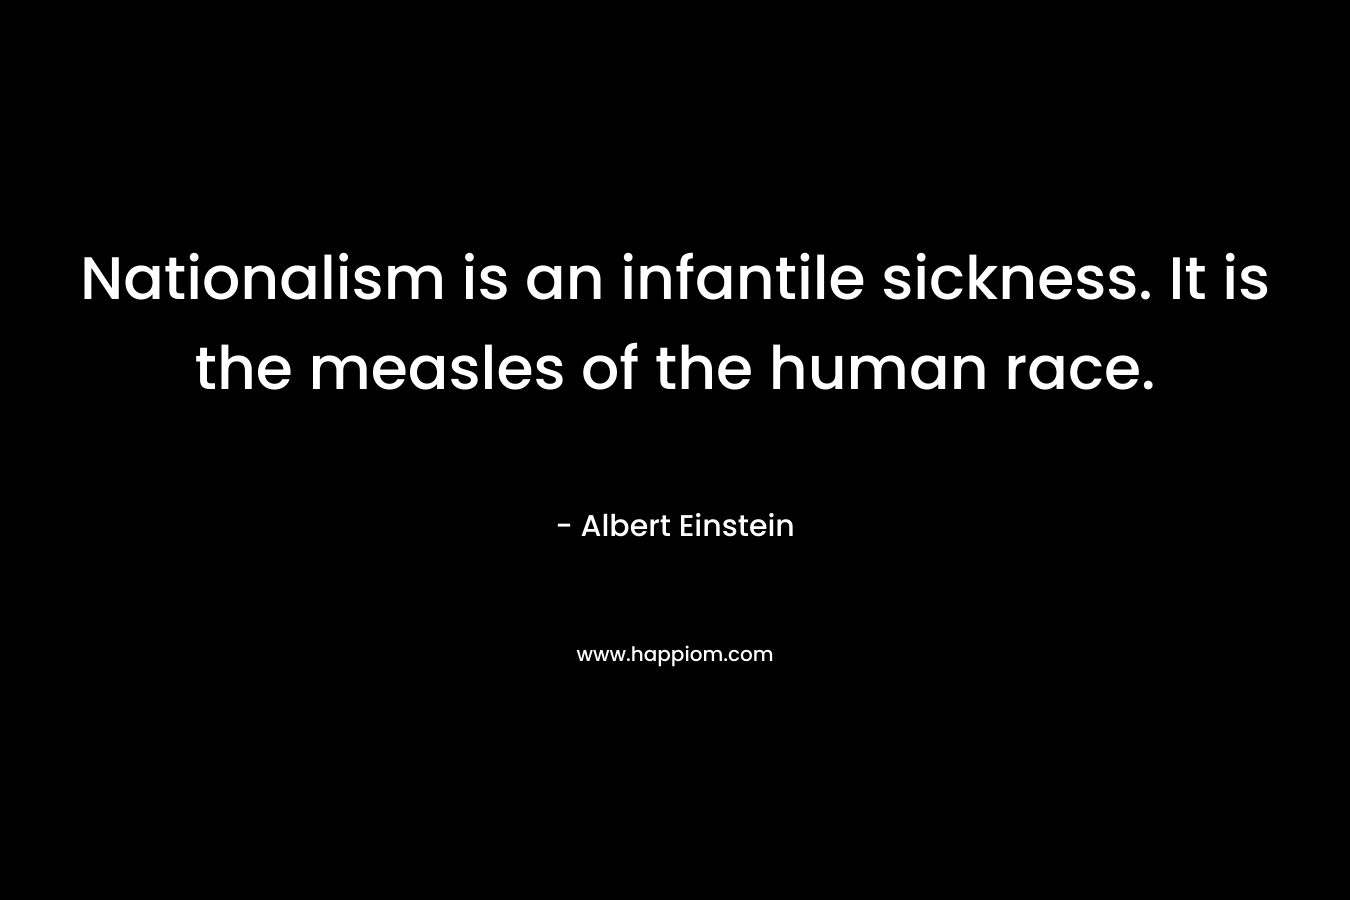 Nationalism is an infantile sickness. It is the measles of the human race. – Albert Einstein